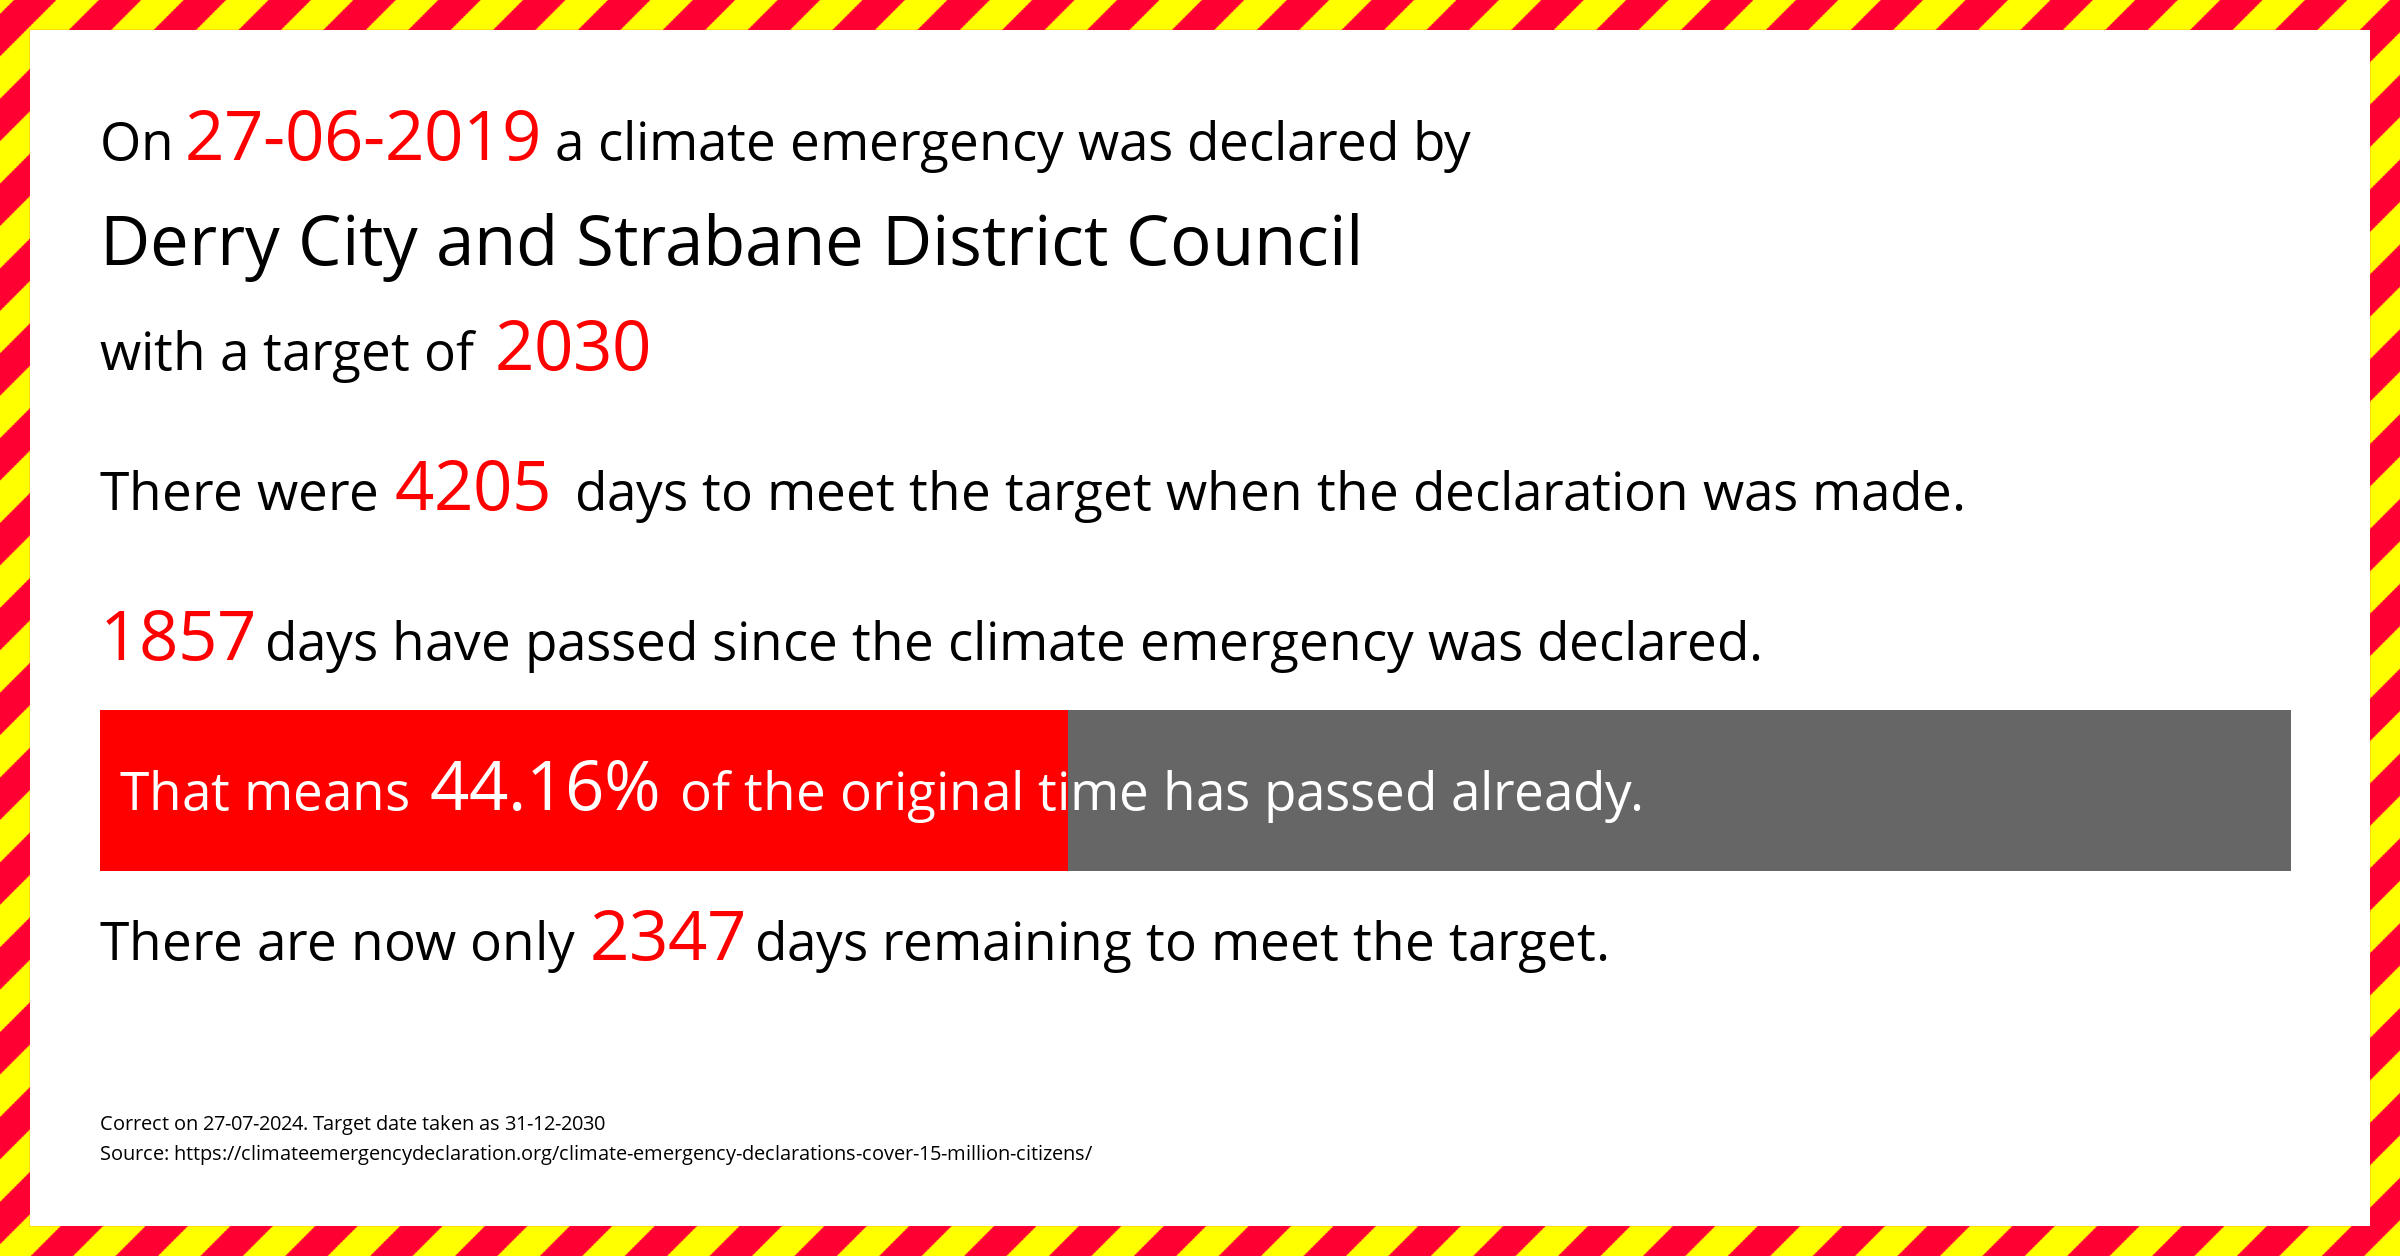 Derry City and Strabane District Council declared a Climate emergency on Thursday 27th June 2019, with a target of 2030.